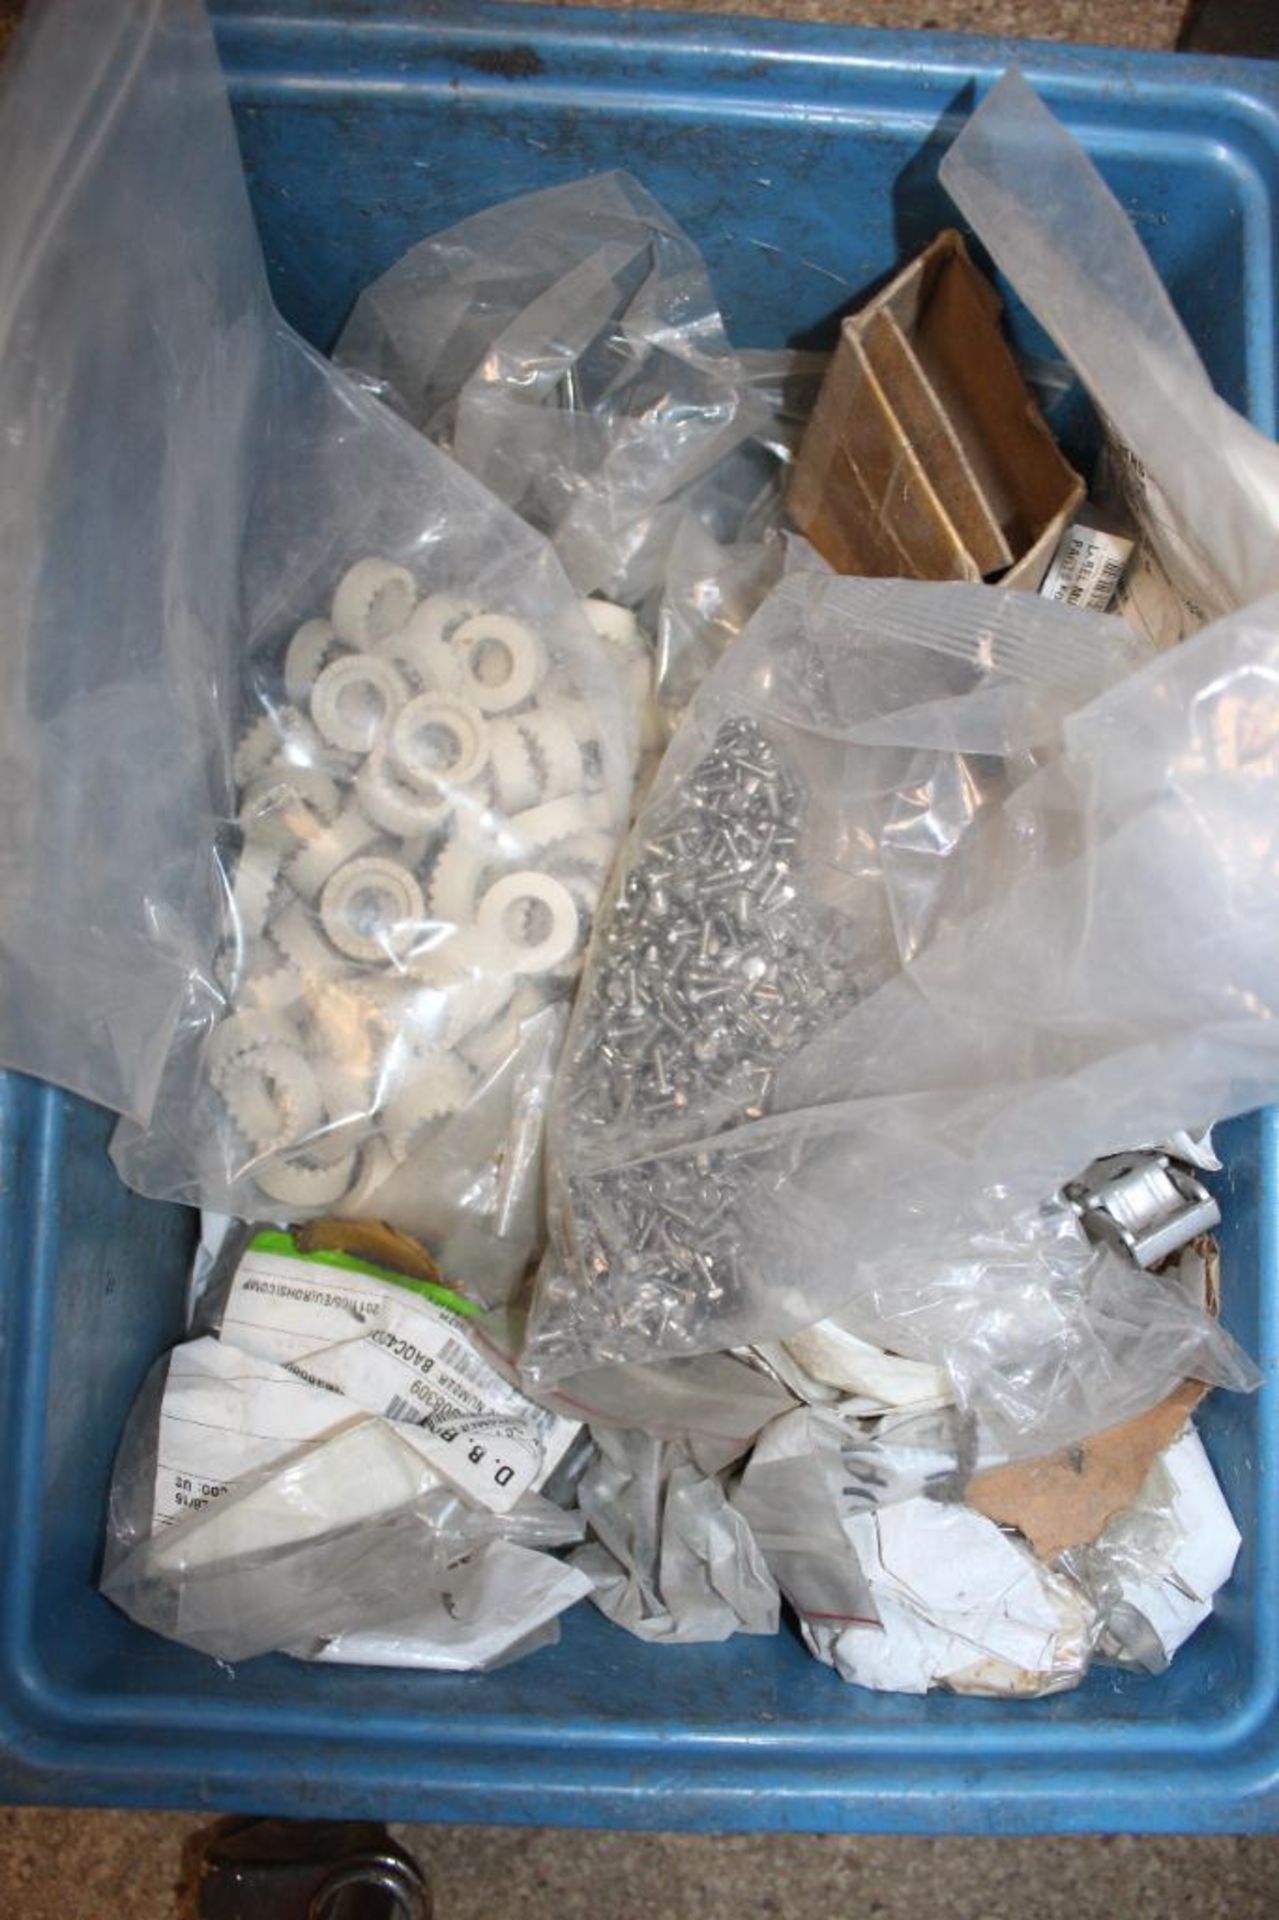 Lot of (9) Boxes and (1) Blue Bin of Assorted Pins, Bolts, Washers and Nuts - Image 13 of 13